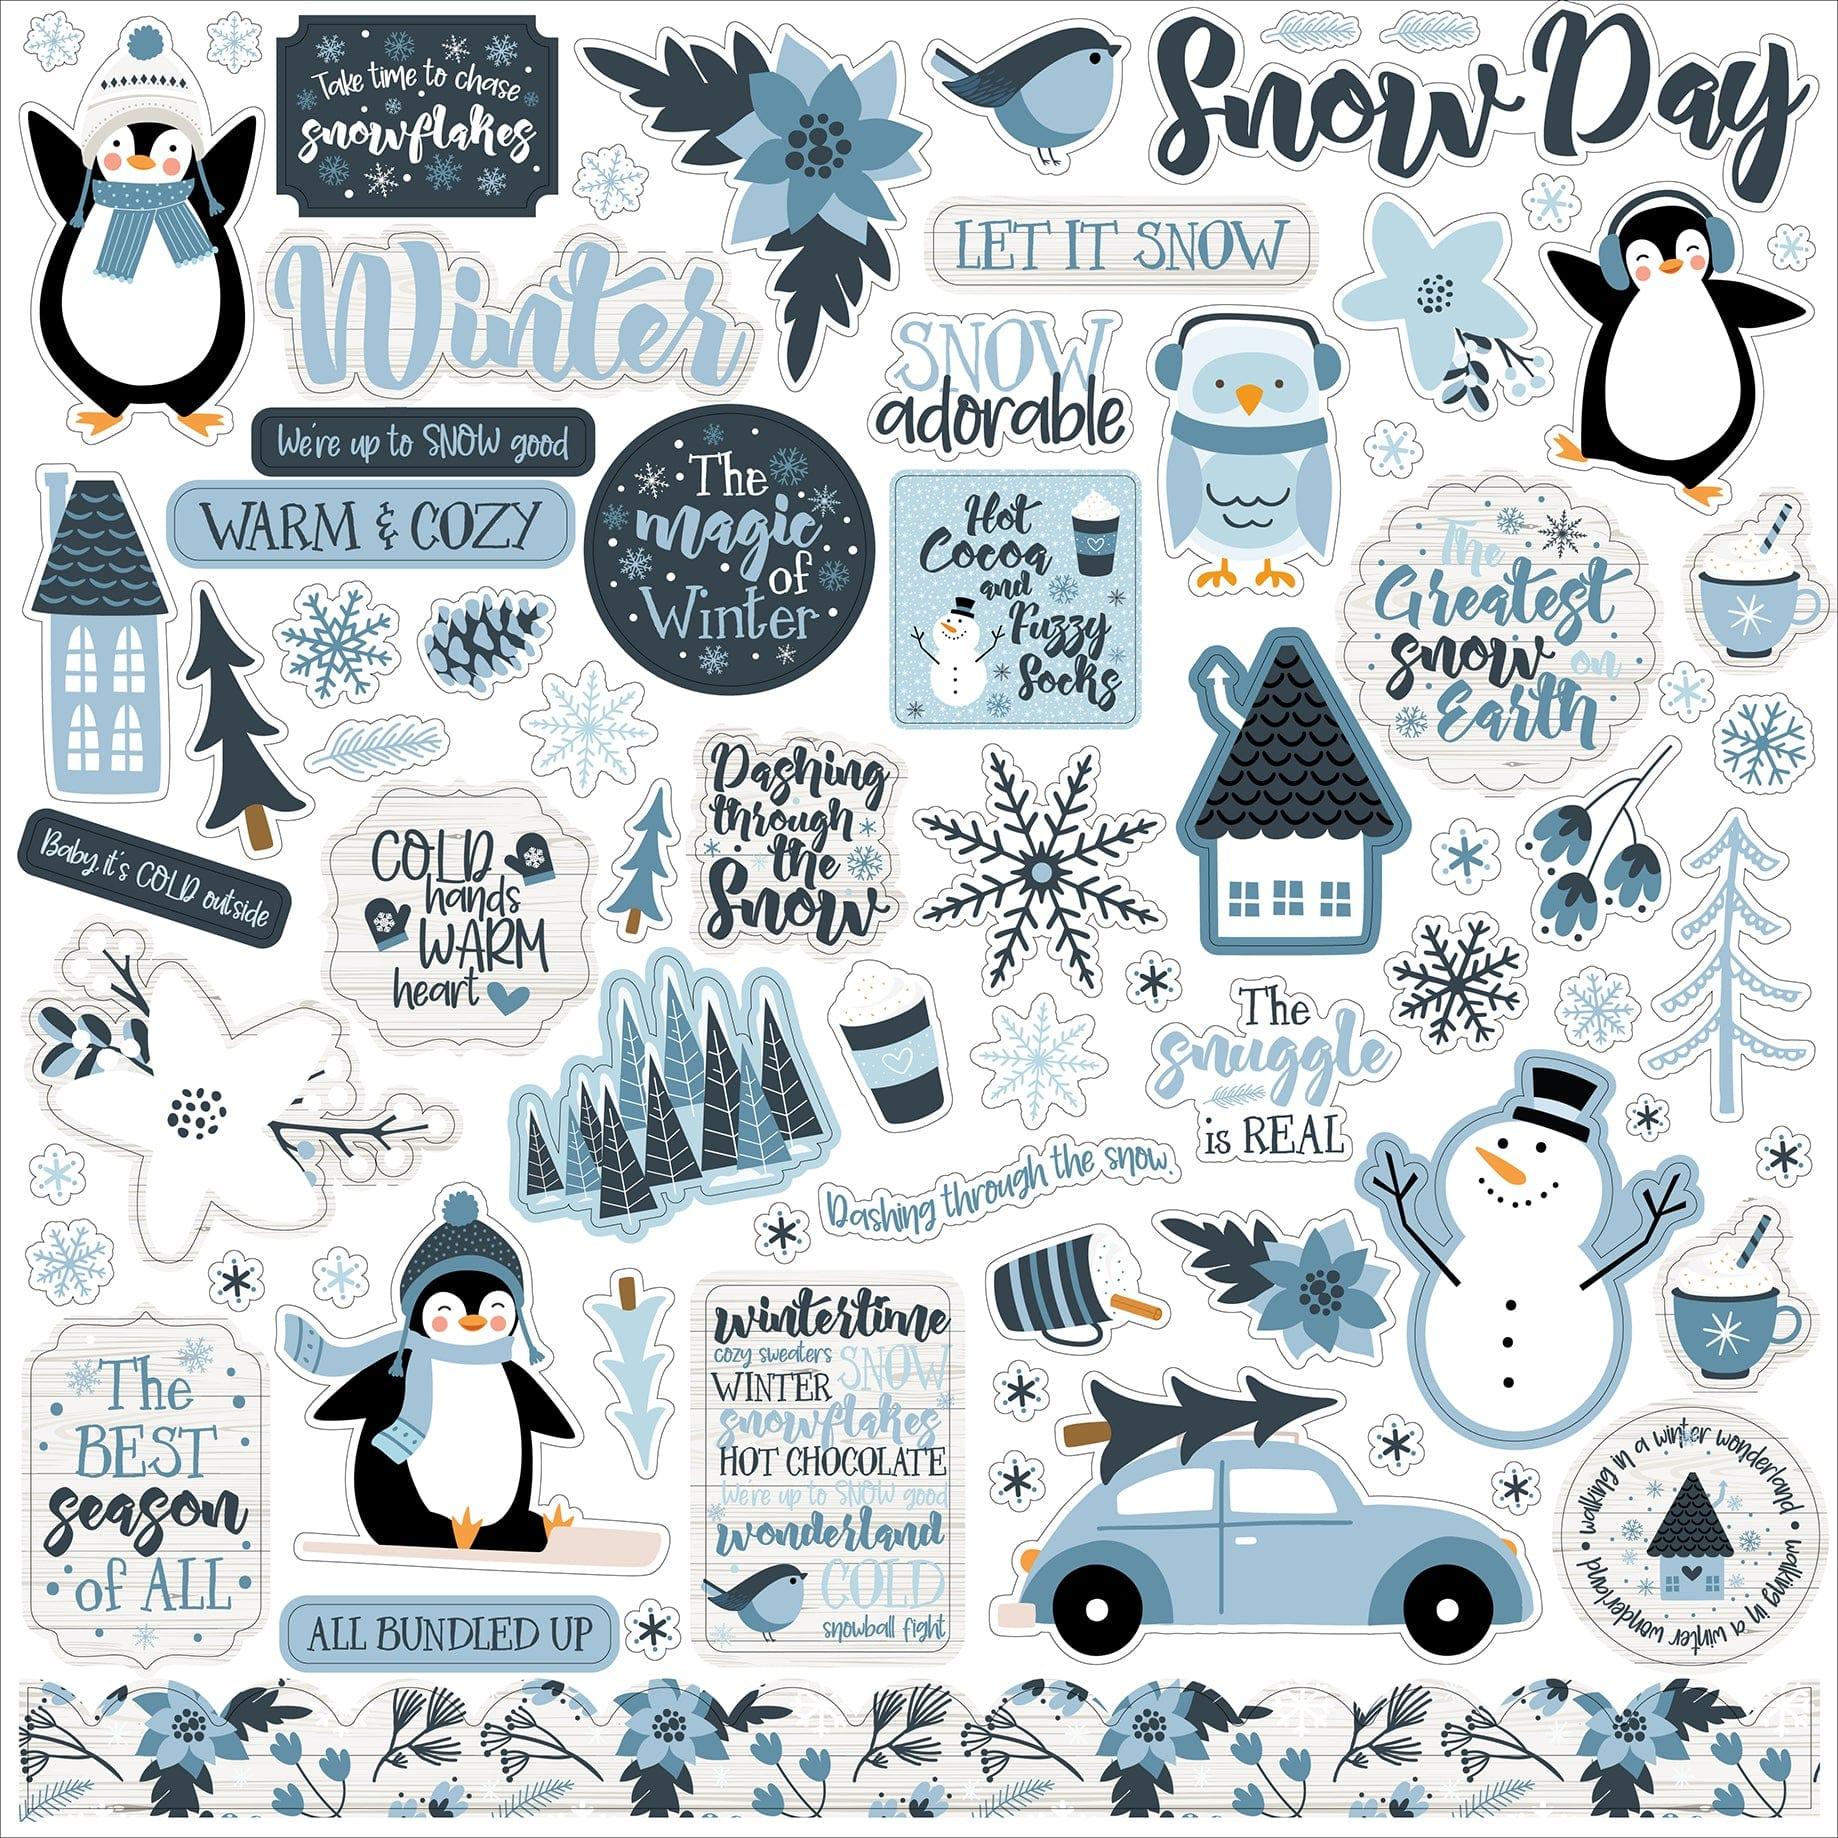 The Magic of Winter Collection 12 x 12 Scrapbook Sticker Sheet by Echo Park Paper - Scrapbook Supply Companies